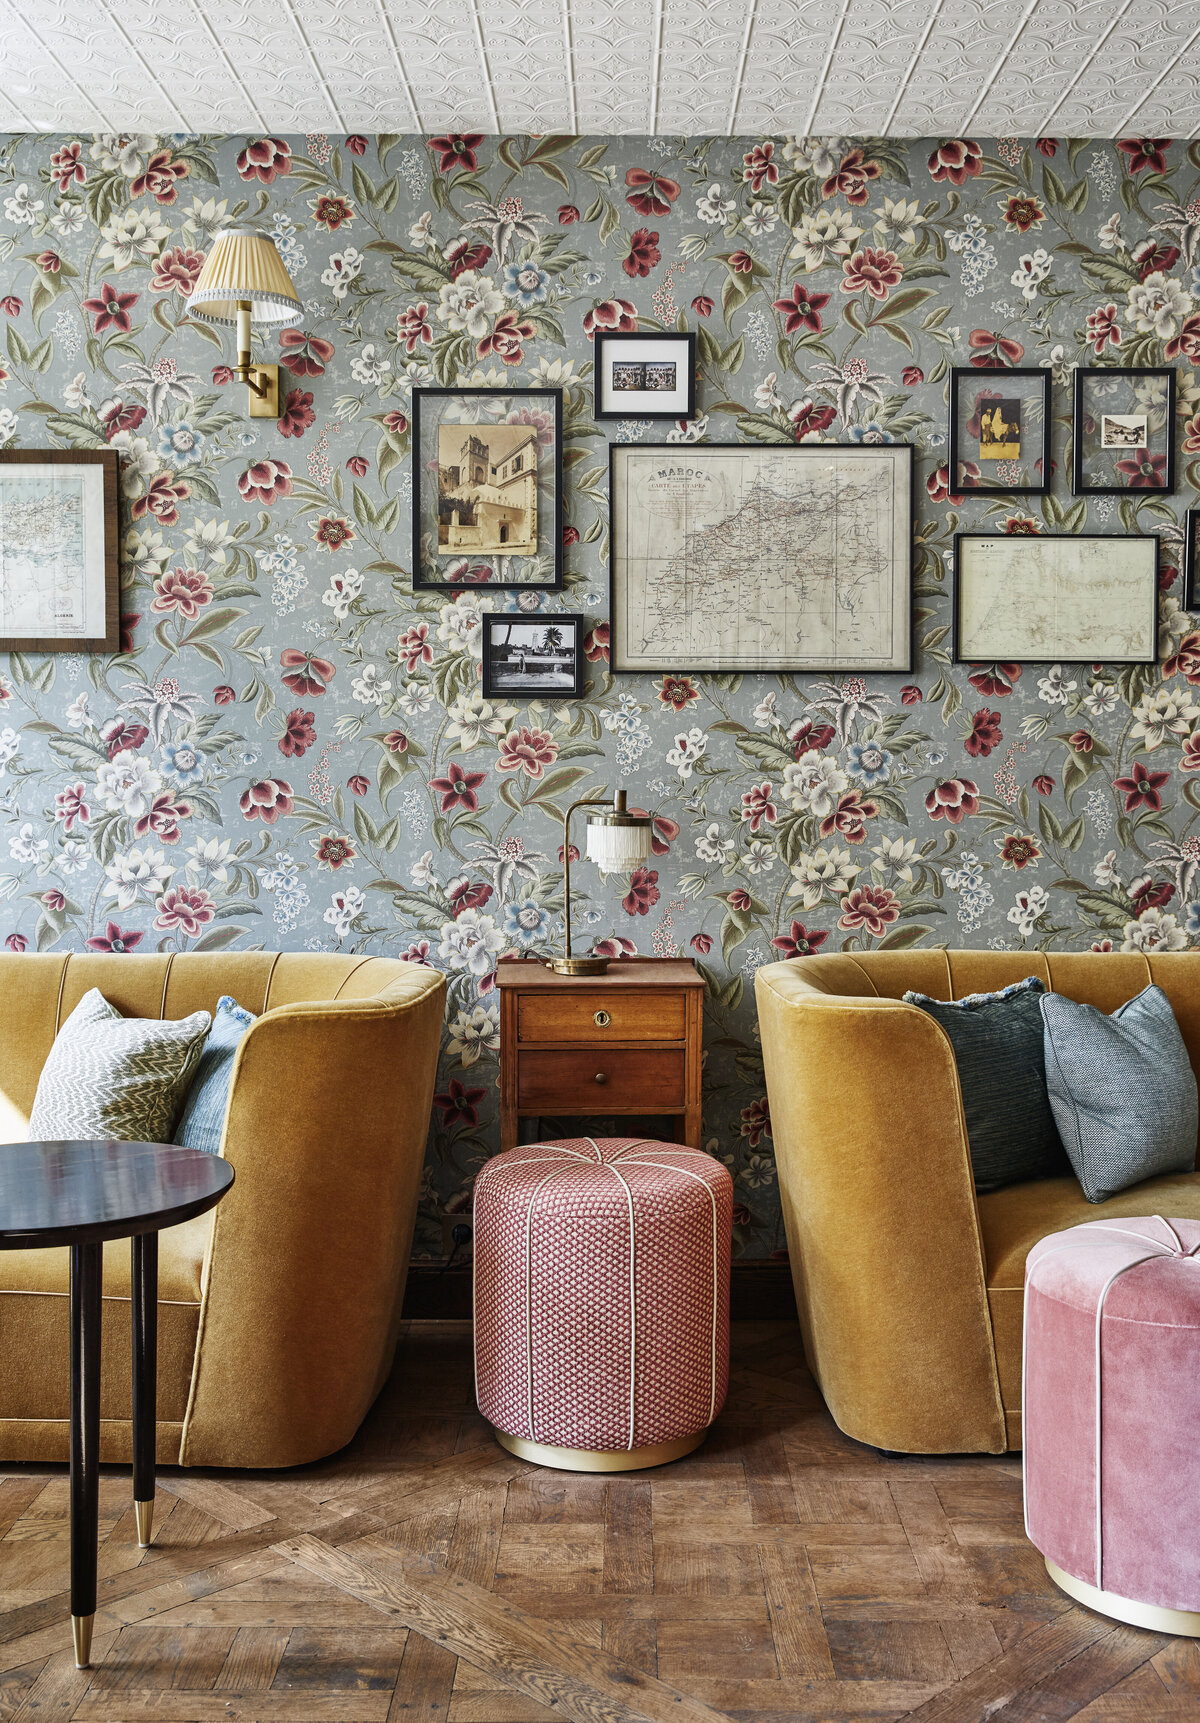 Wooden inlaid floor, floral wallpaper, white tin ceiling, yellow mohair curved sofas and pink pouffes